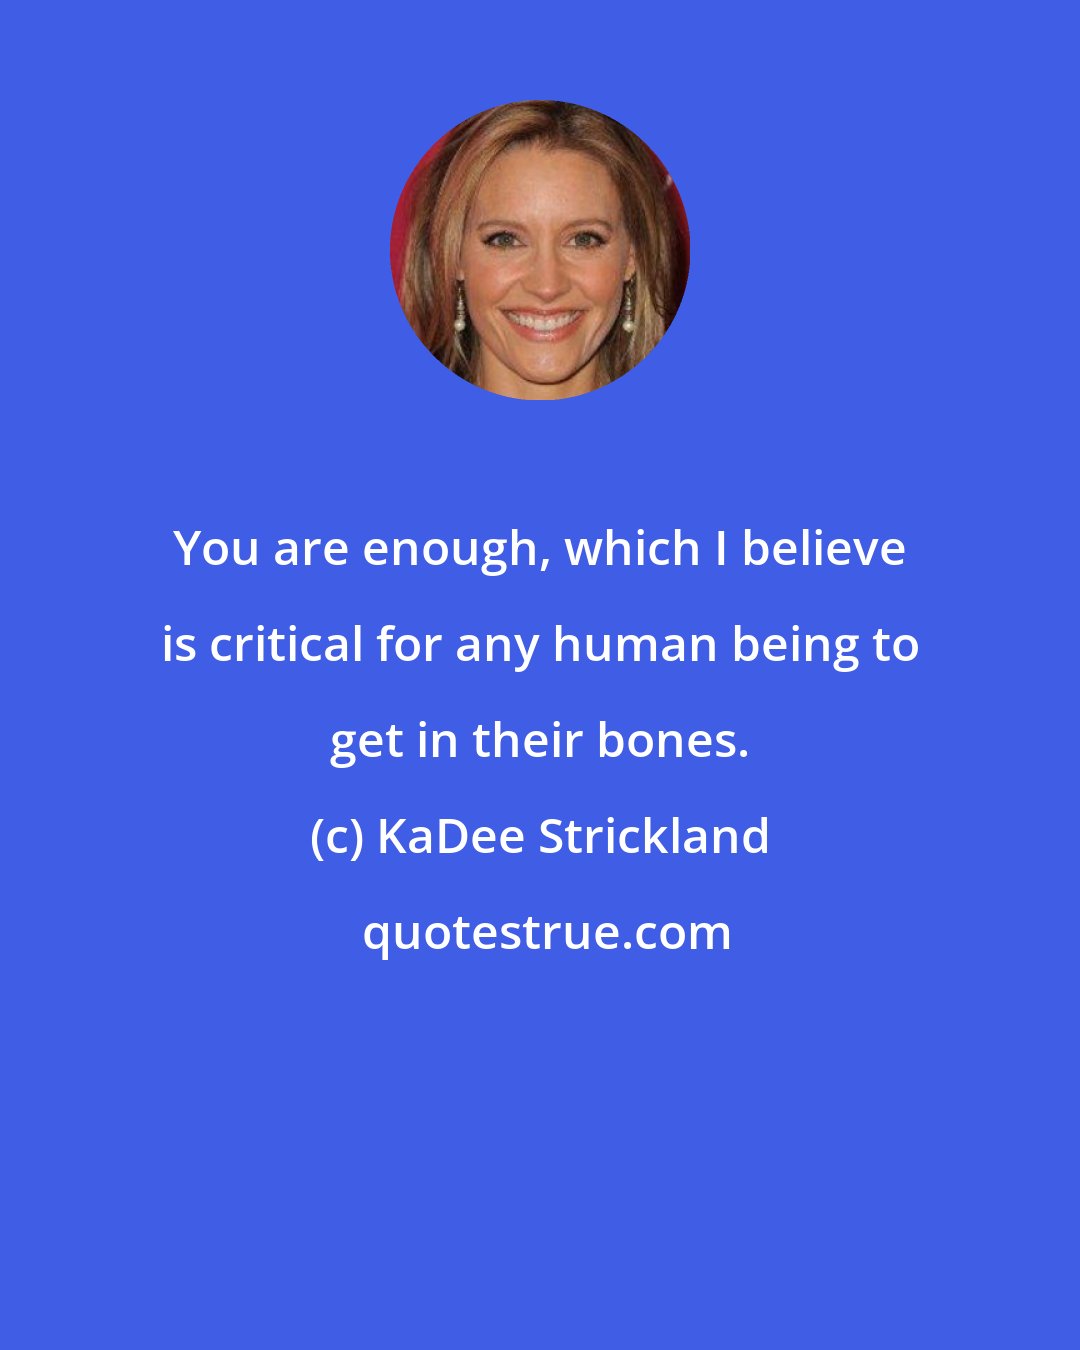 KaDee Strickland: You are enough, which I believe is critical for any human being to get in their bones.